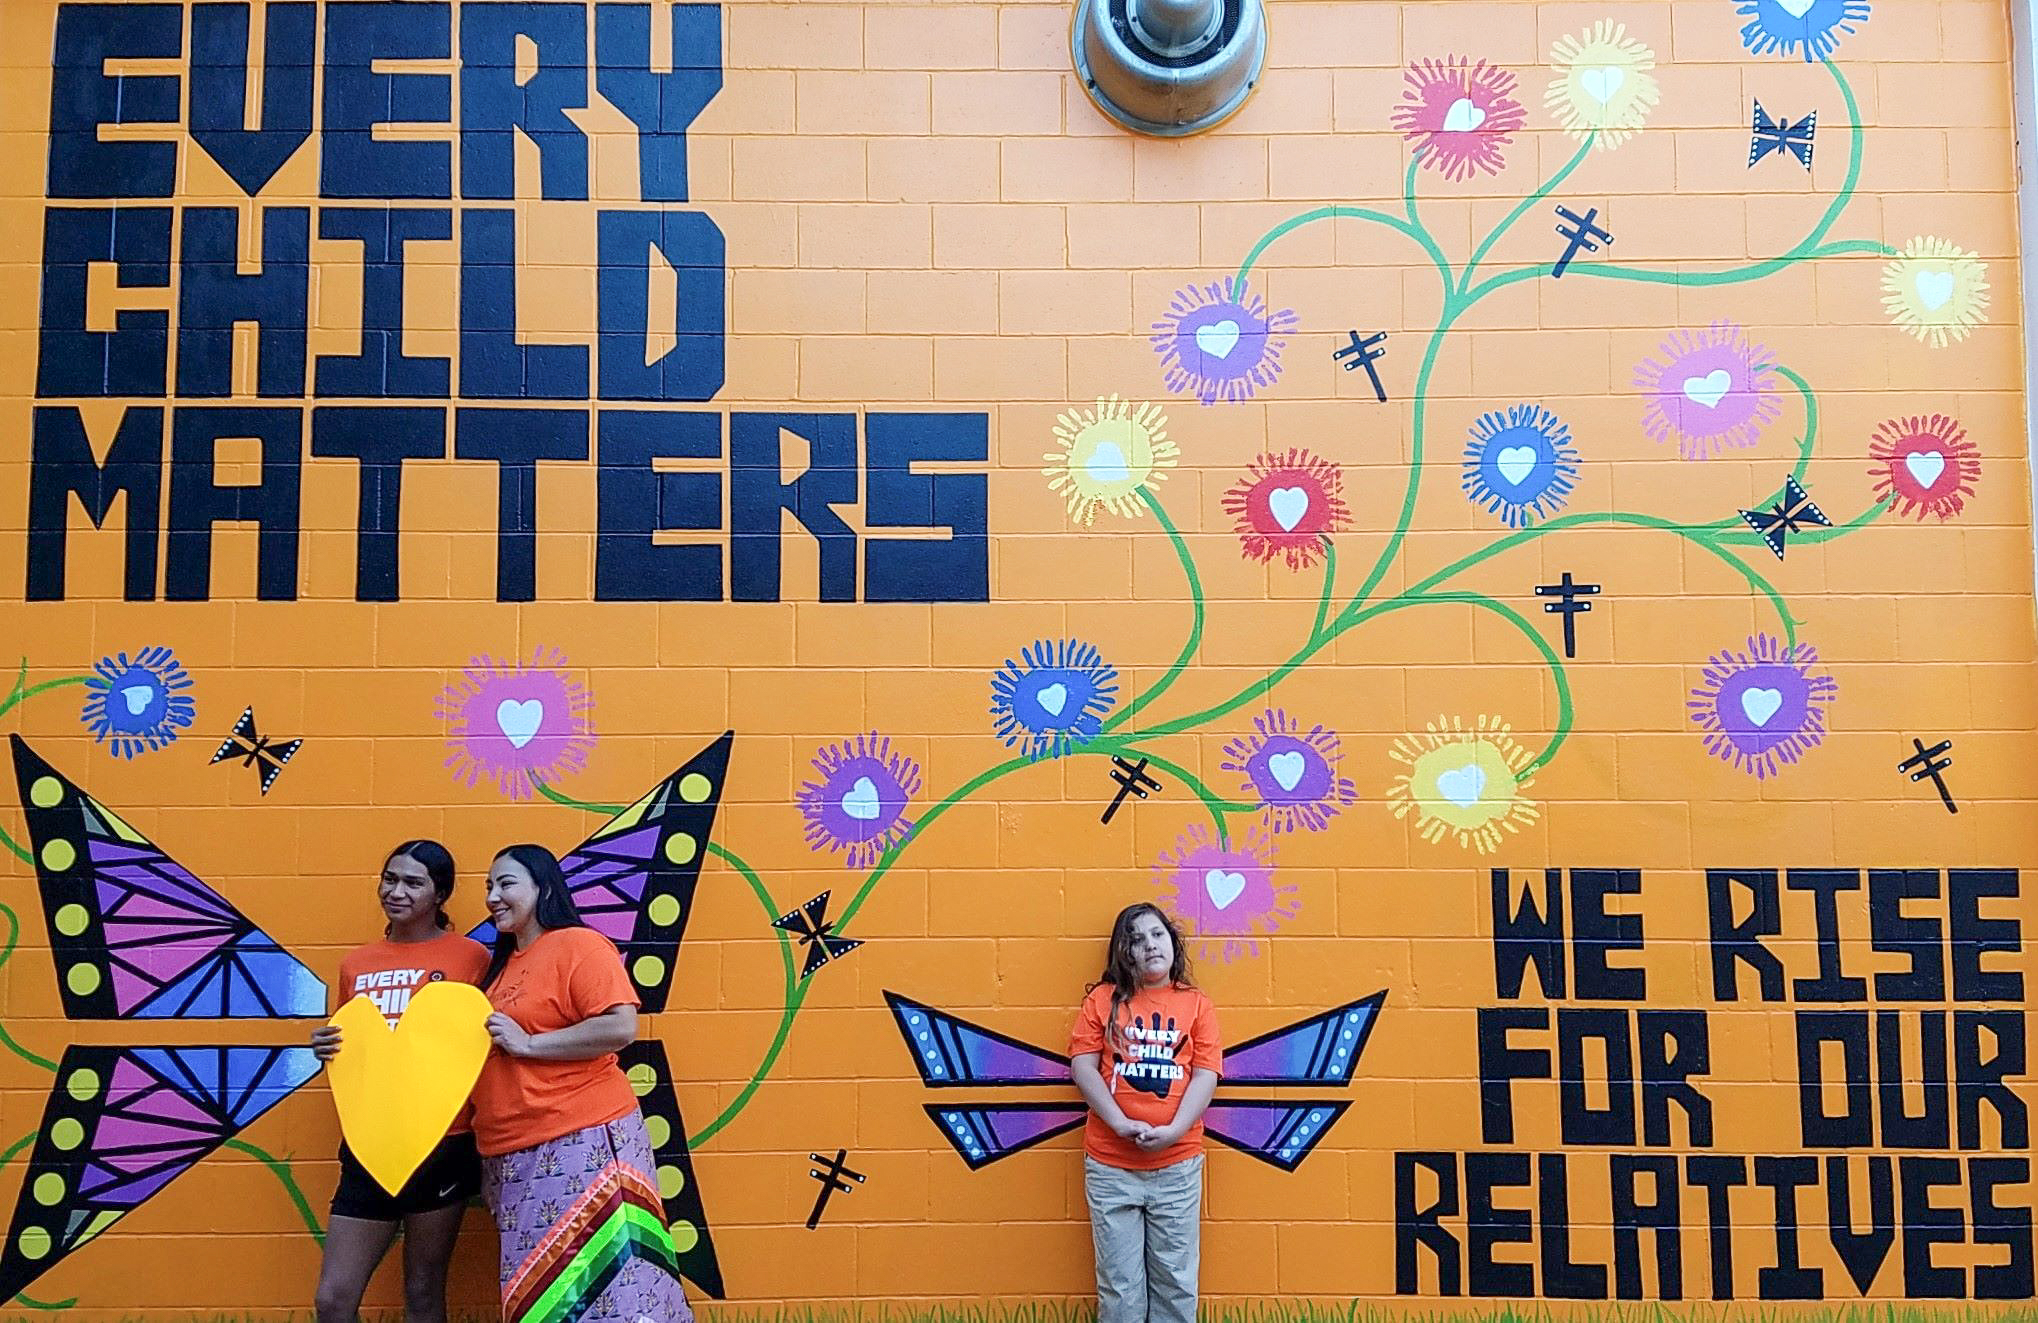 Two adults and one child stand by a large wall mural with a bright orange backdrop. The mural depicts flowers on vines extending towards the top, and words painted in black lettering that read, "every child matter" and "we rise for our relatives."